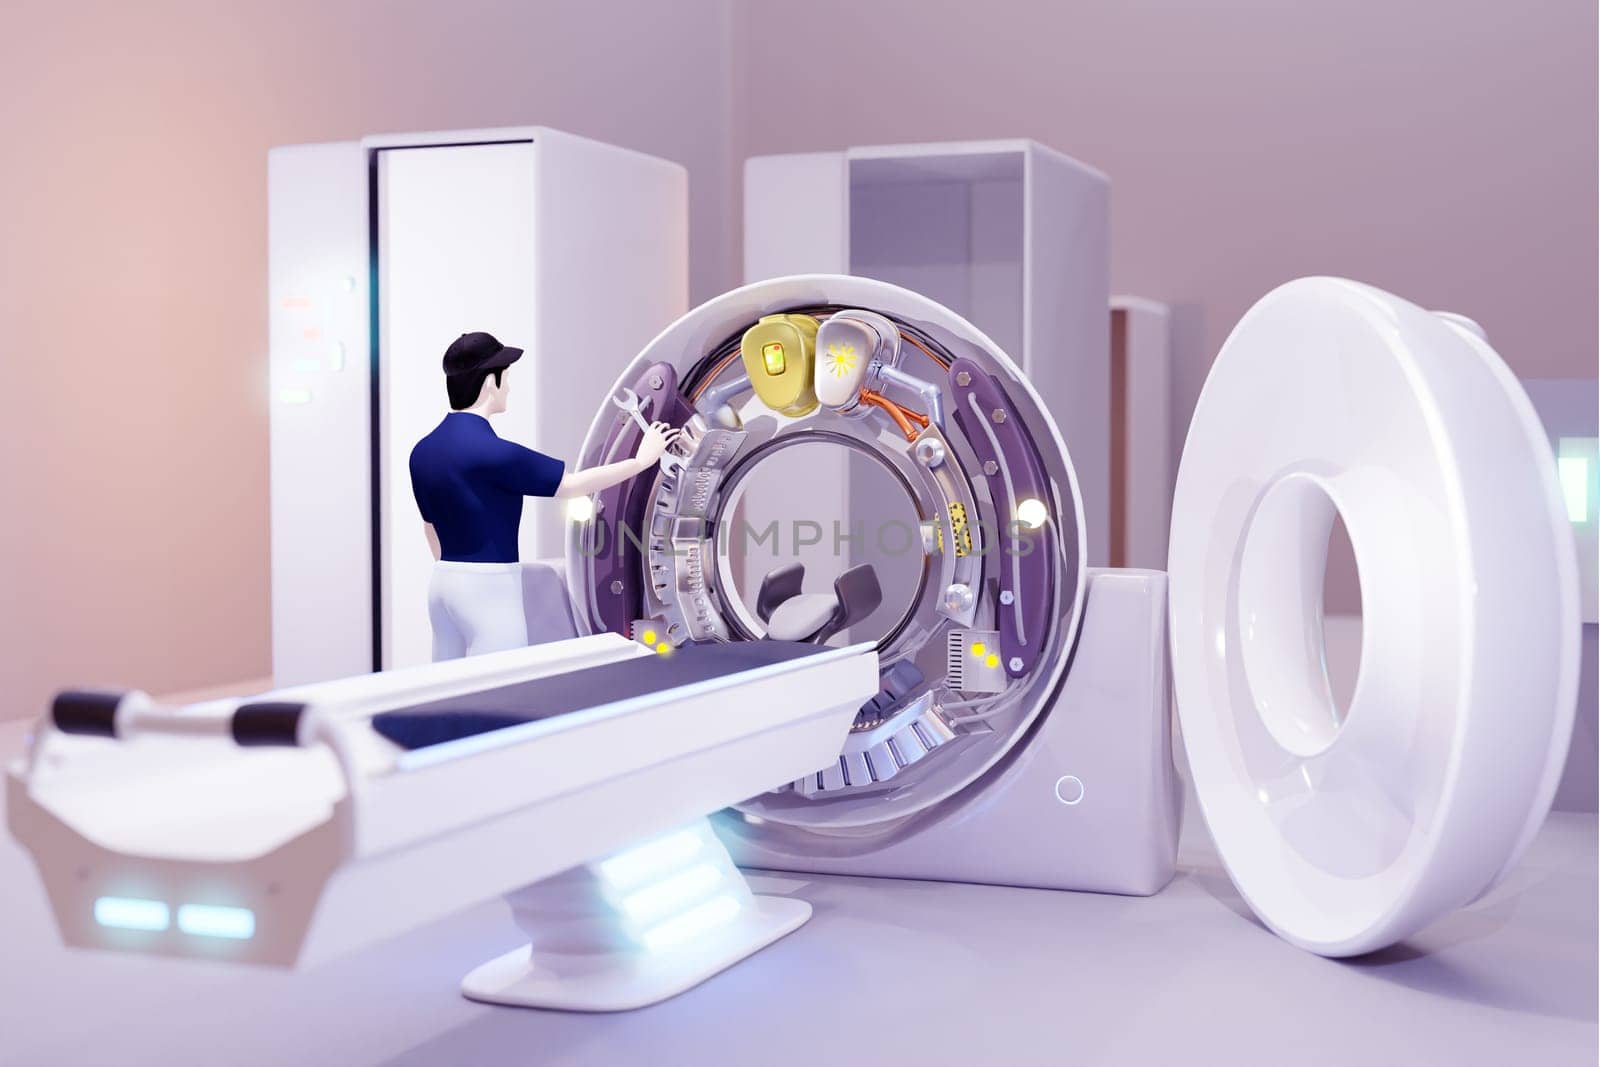 A maintenance engineer is checking the CT scan machine for normal operation every 6 months in the hospital. according to hospital standards. by samunella